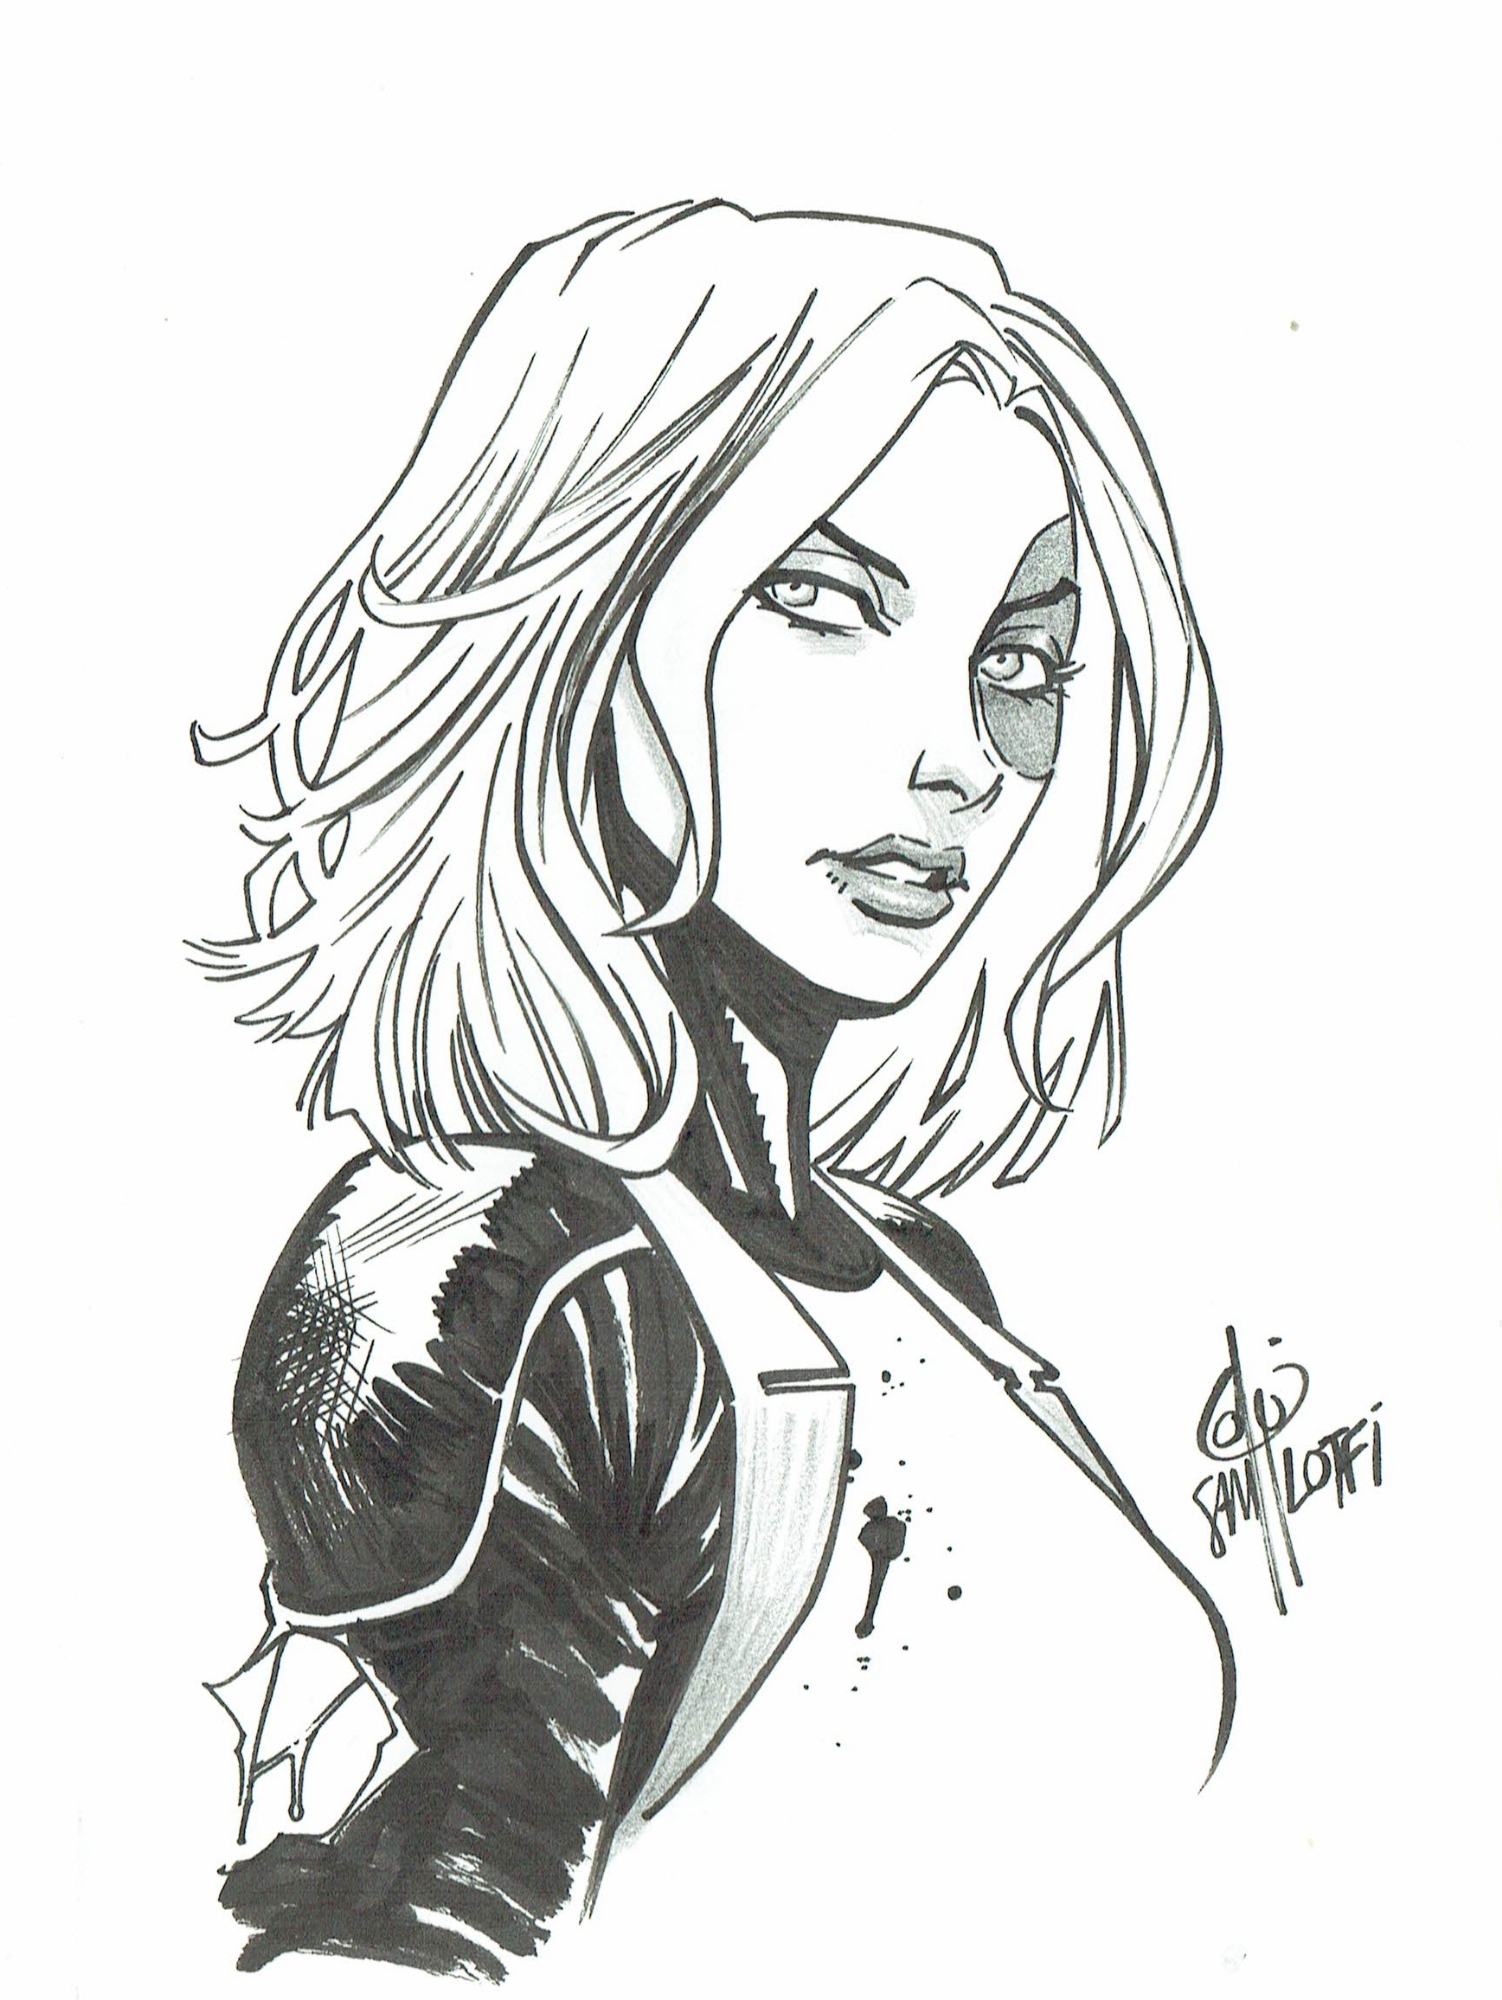 Domino Commission by Sam Lotfi, in Jason Wood's Commissions and ...